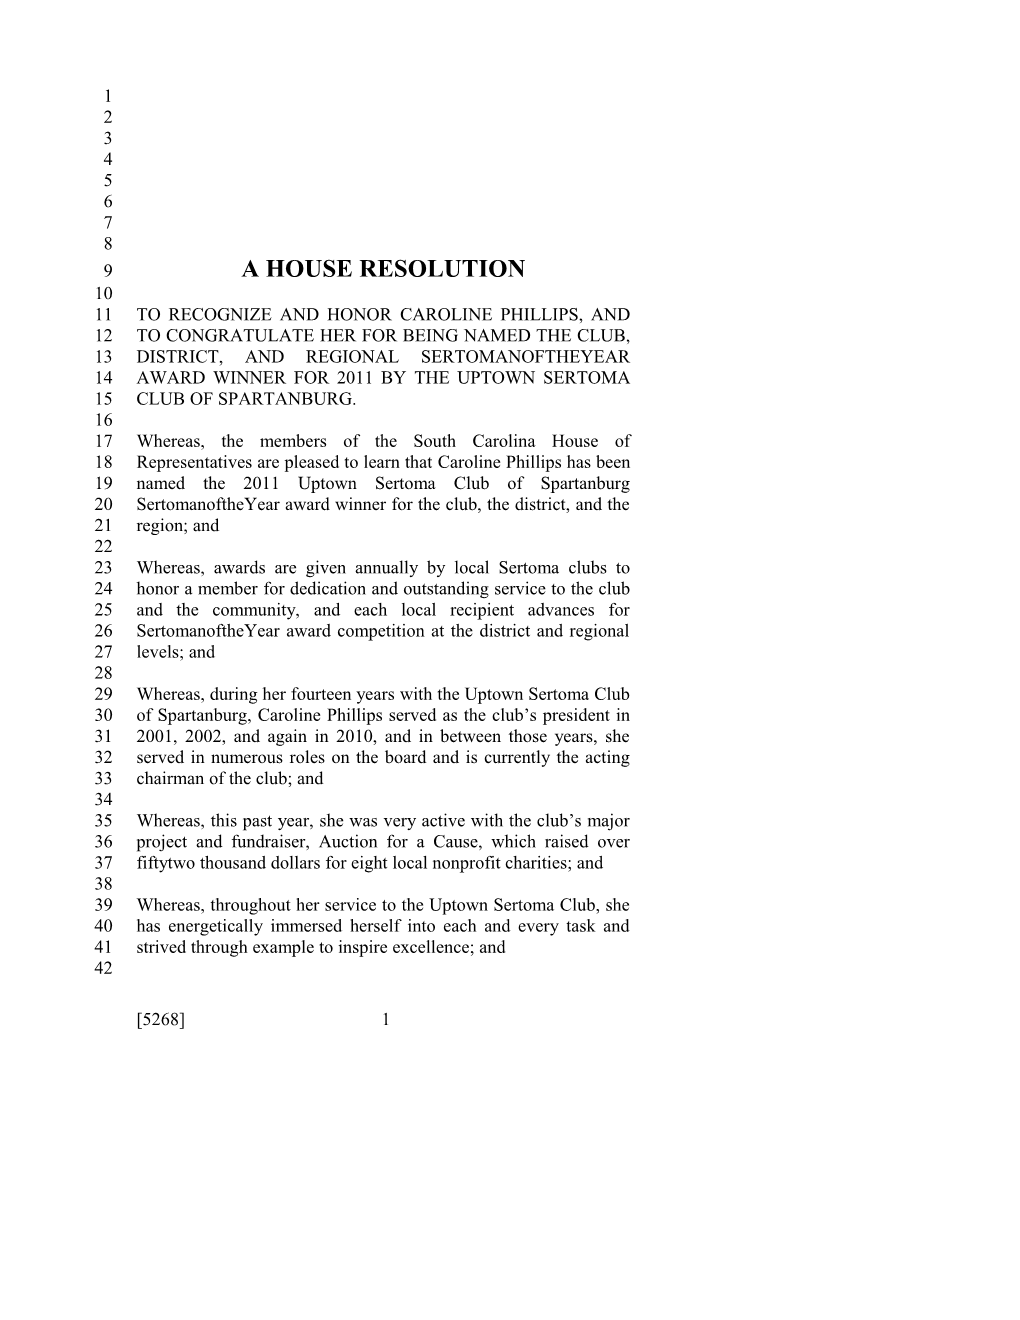 A House Resolution s10